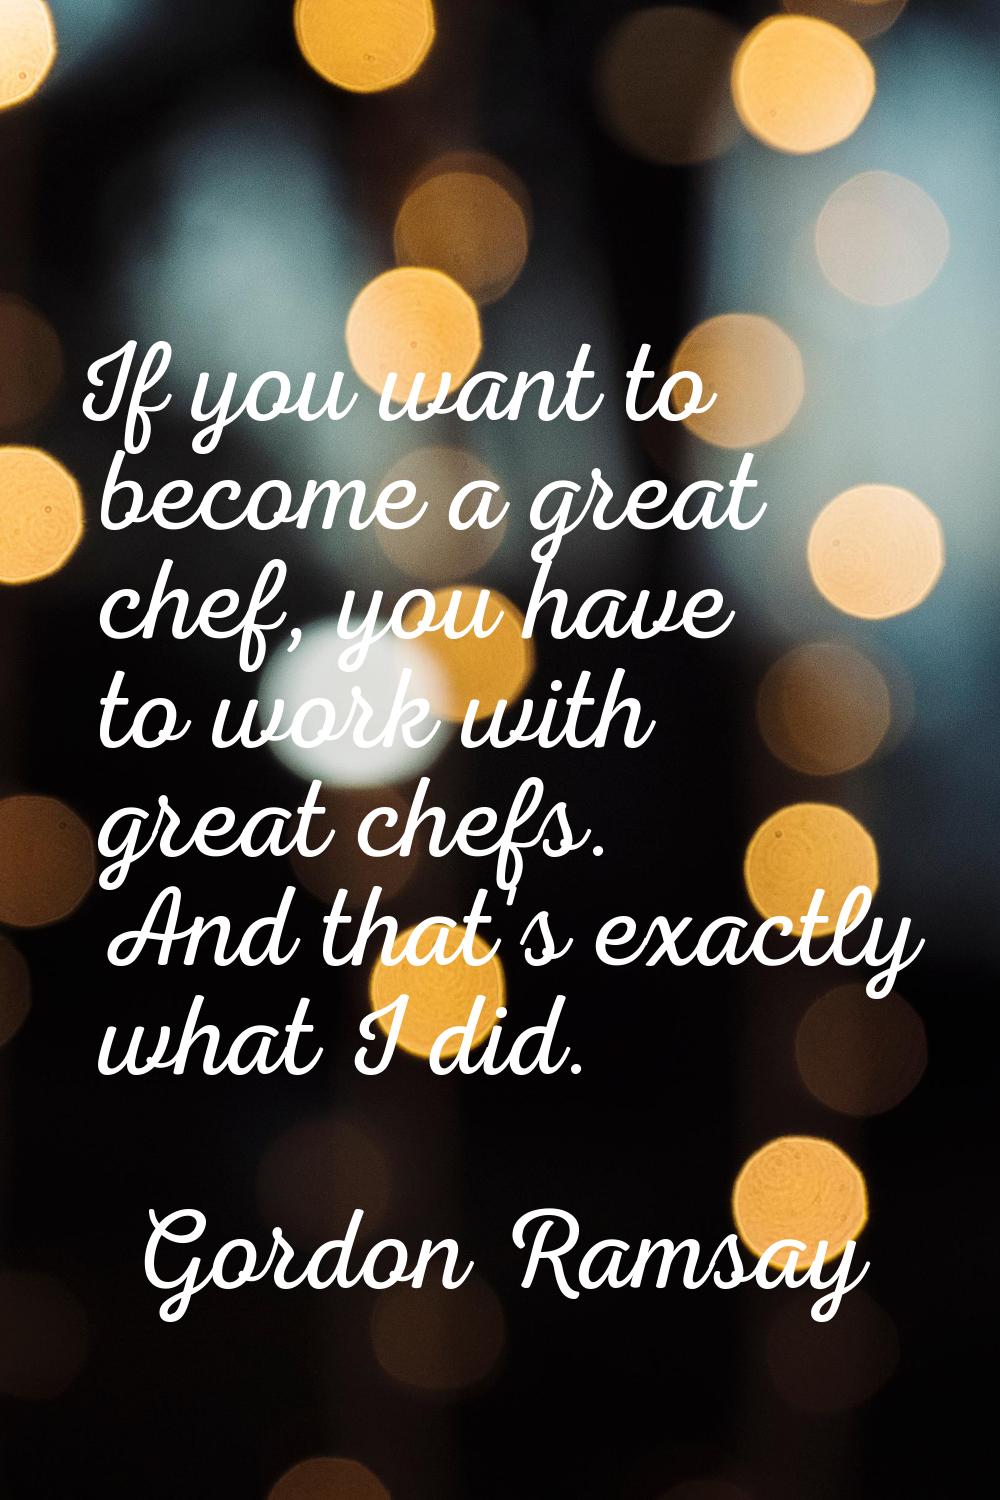 If you want to become a great chef, you have to work with great chefs. And that's exactly what I di